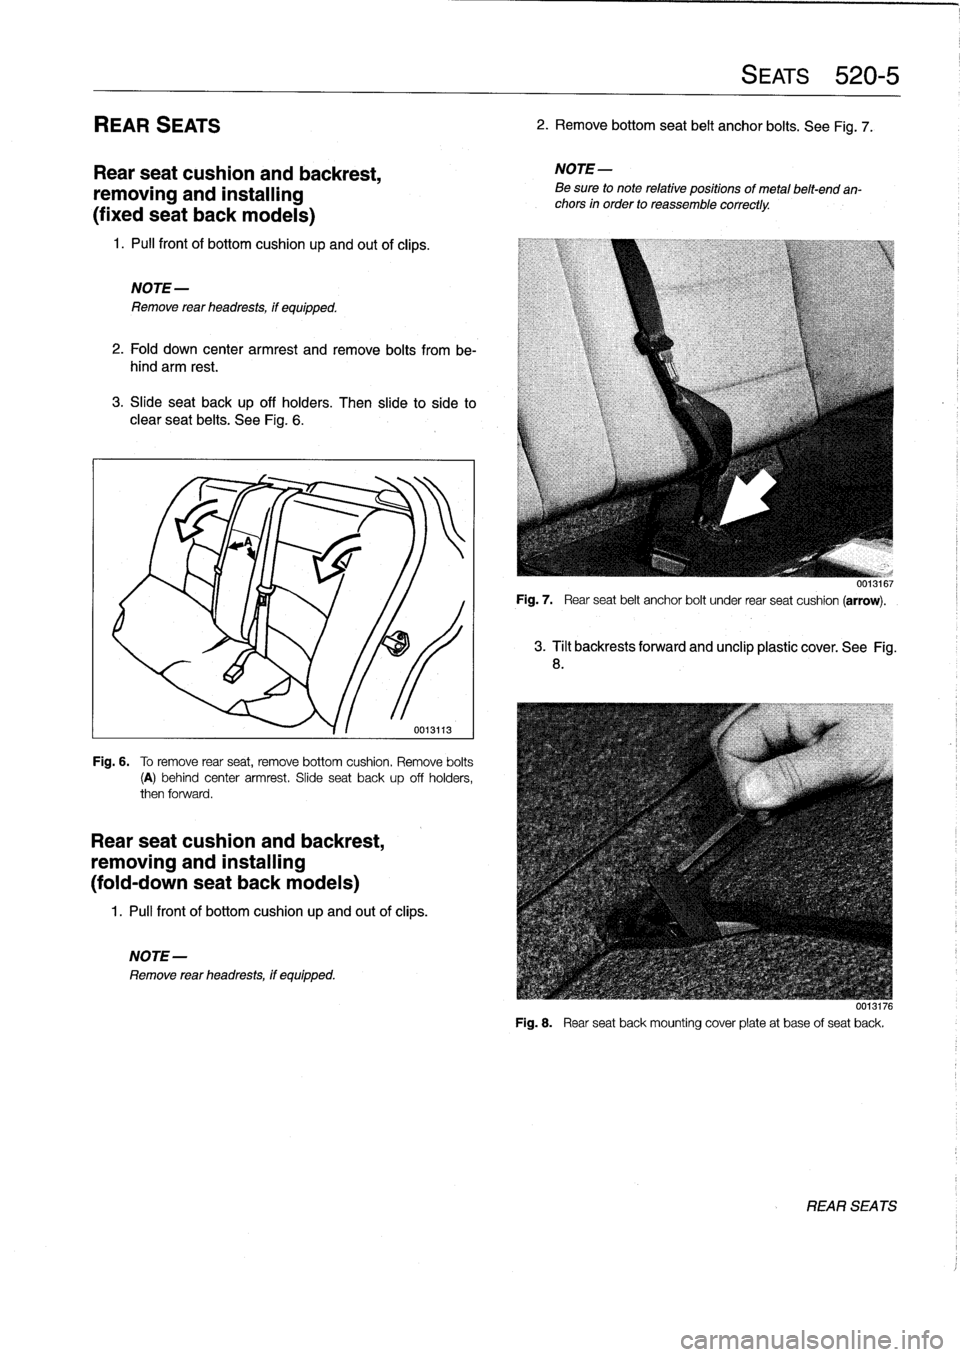 BMW 325i 1992 E36 Workshop Manual 
REAR
SEATS

Rear
seat
cushion
and
backrest,

removing
and
installing

(fixed
seat
back
modeis)

1
.
Pull
front
of
bottomcushion
up
and
out
of
clips
.

NOTE-

Remove
rear
headrests,
if
equipped
.

2
.